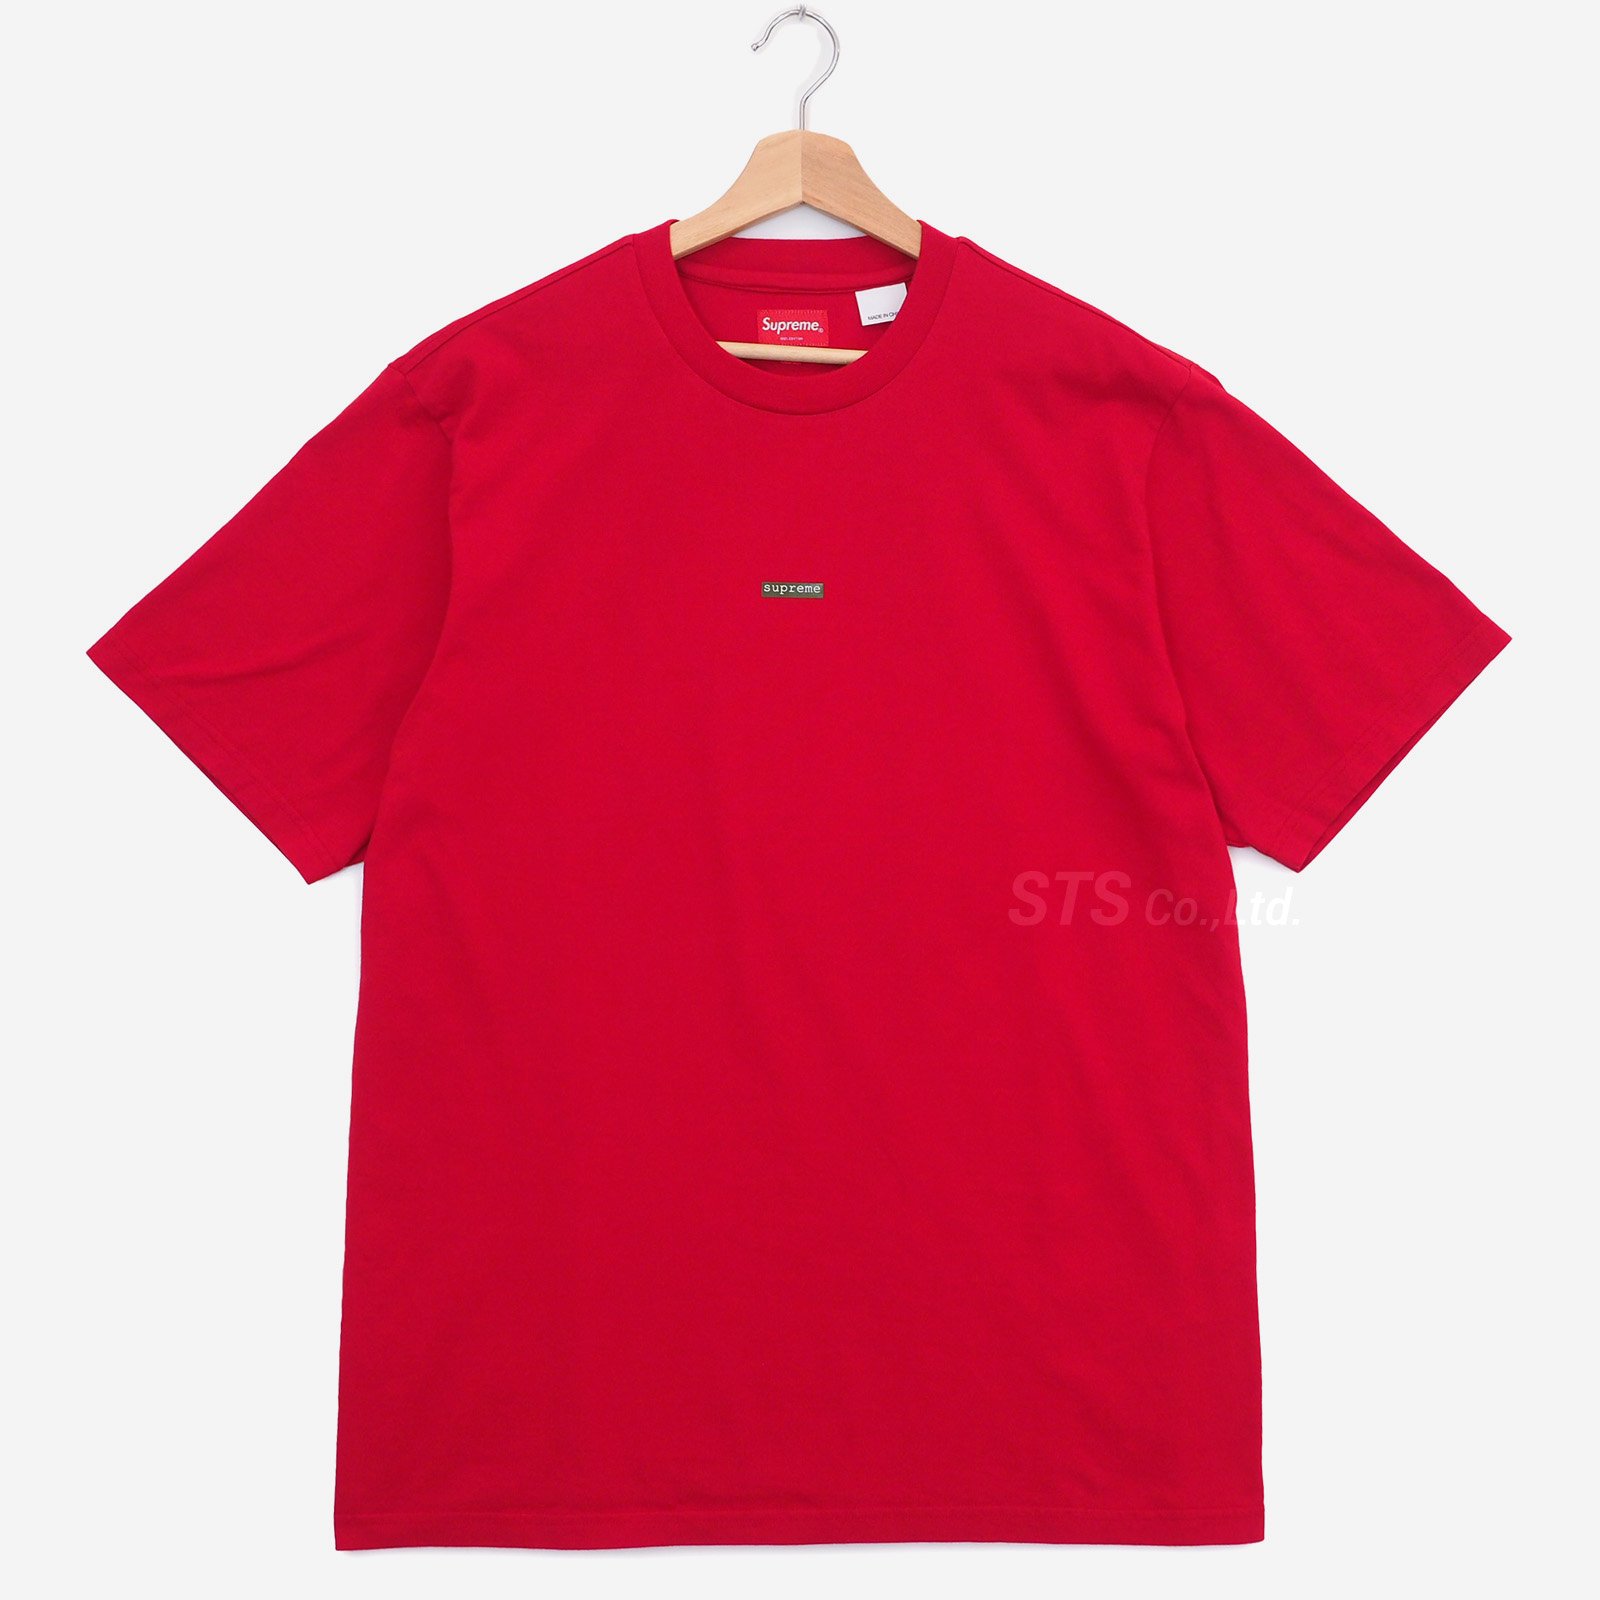 L 黒 Supreme Typewriter S/S Top Small BoxTシャツ/カットソー(半袖